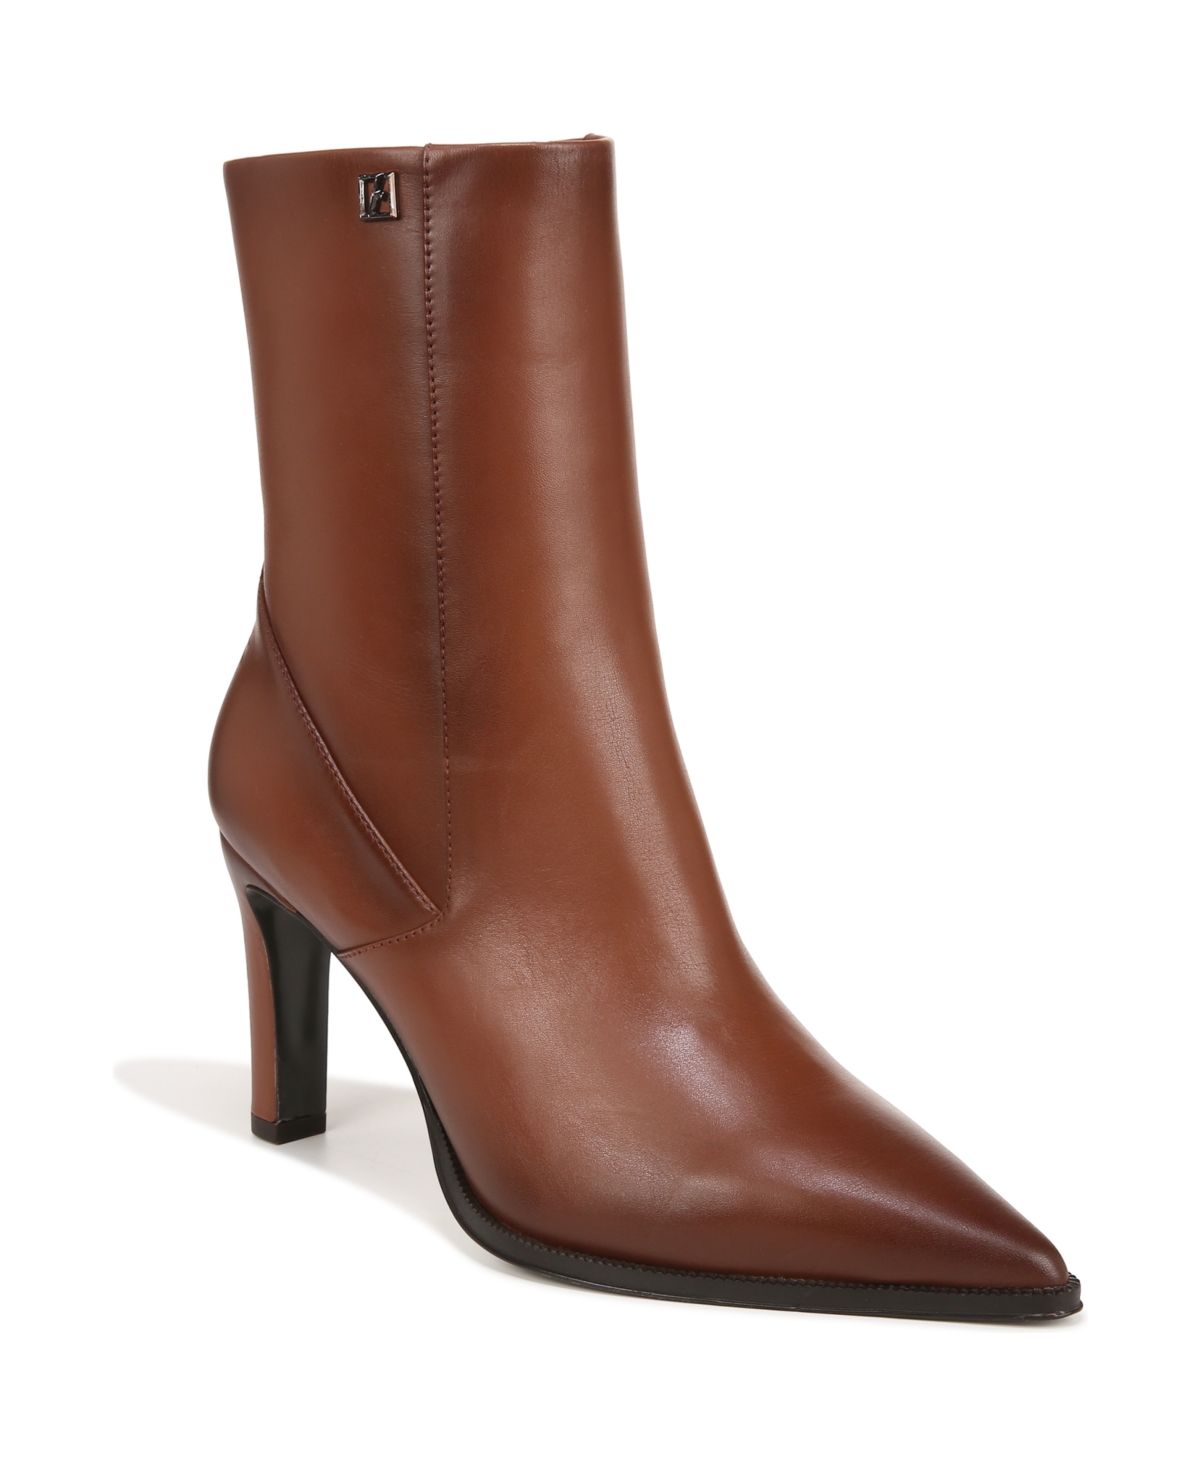 Appia Dress Booties - Tobacco Brown Leather